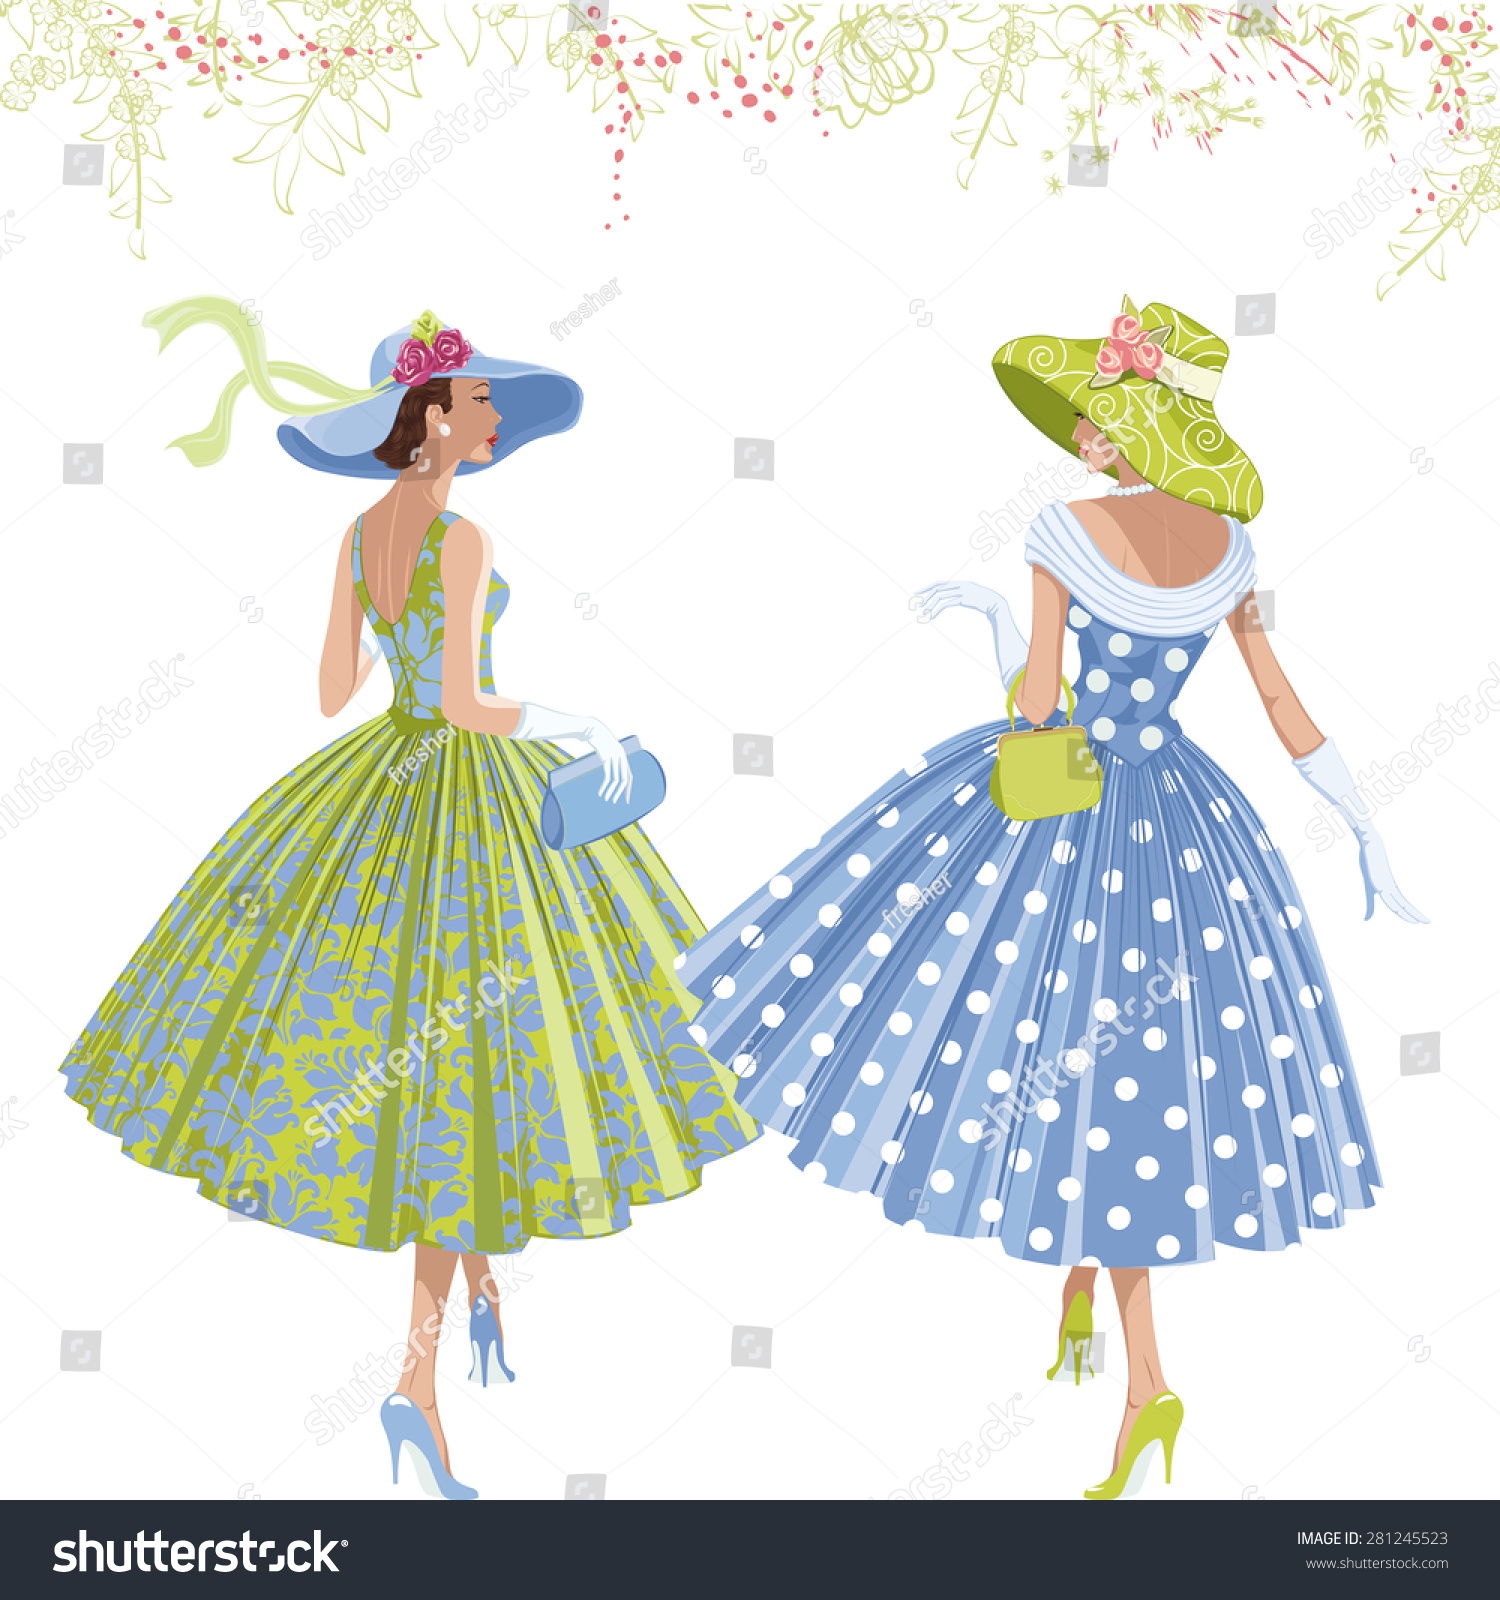 SVG of Two walking elegant women dressed in style of 1950s isolated on white background. svg